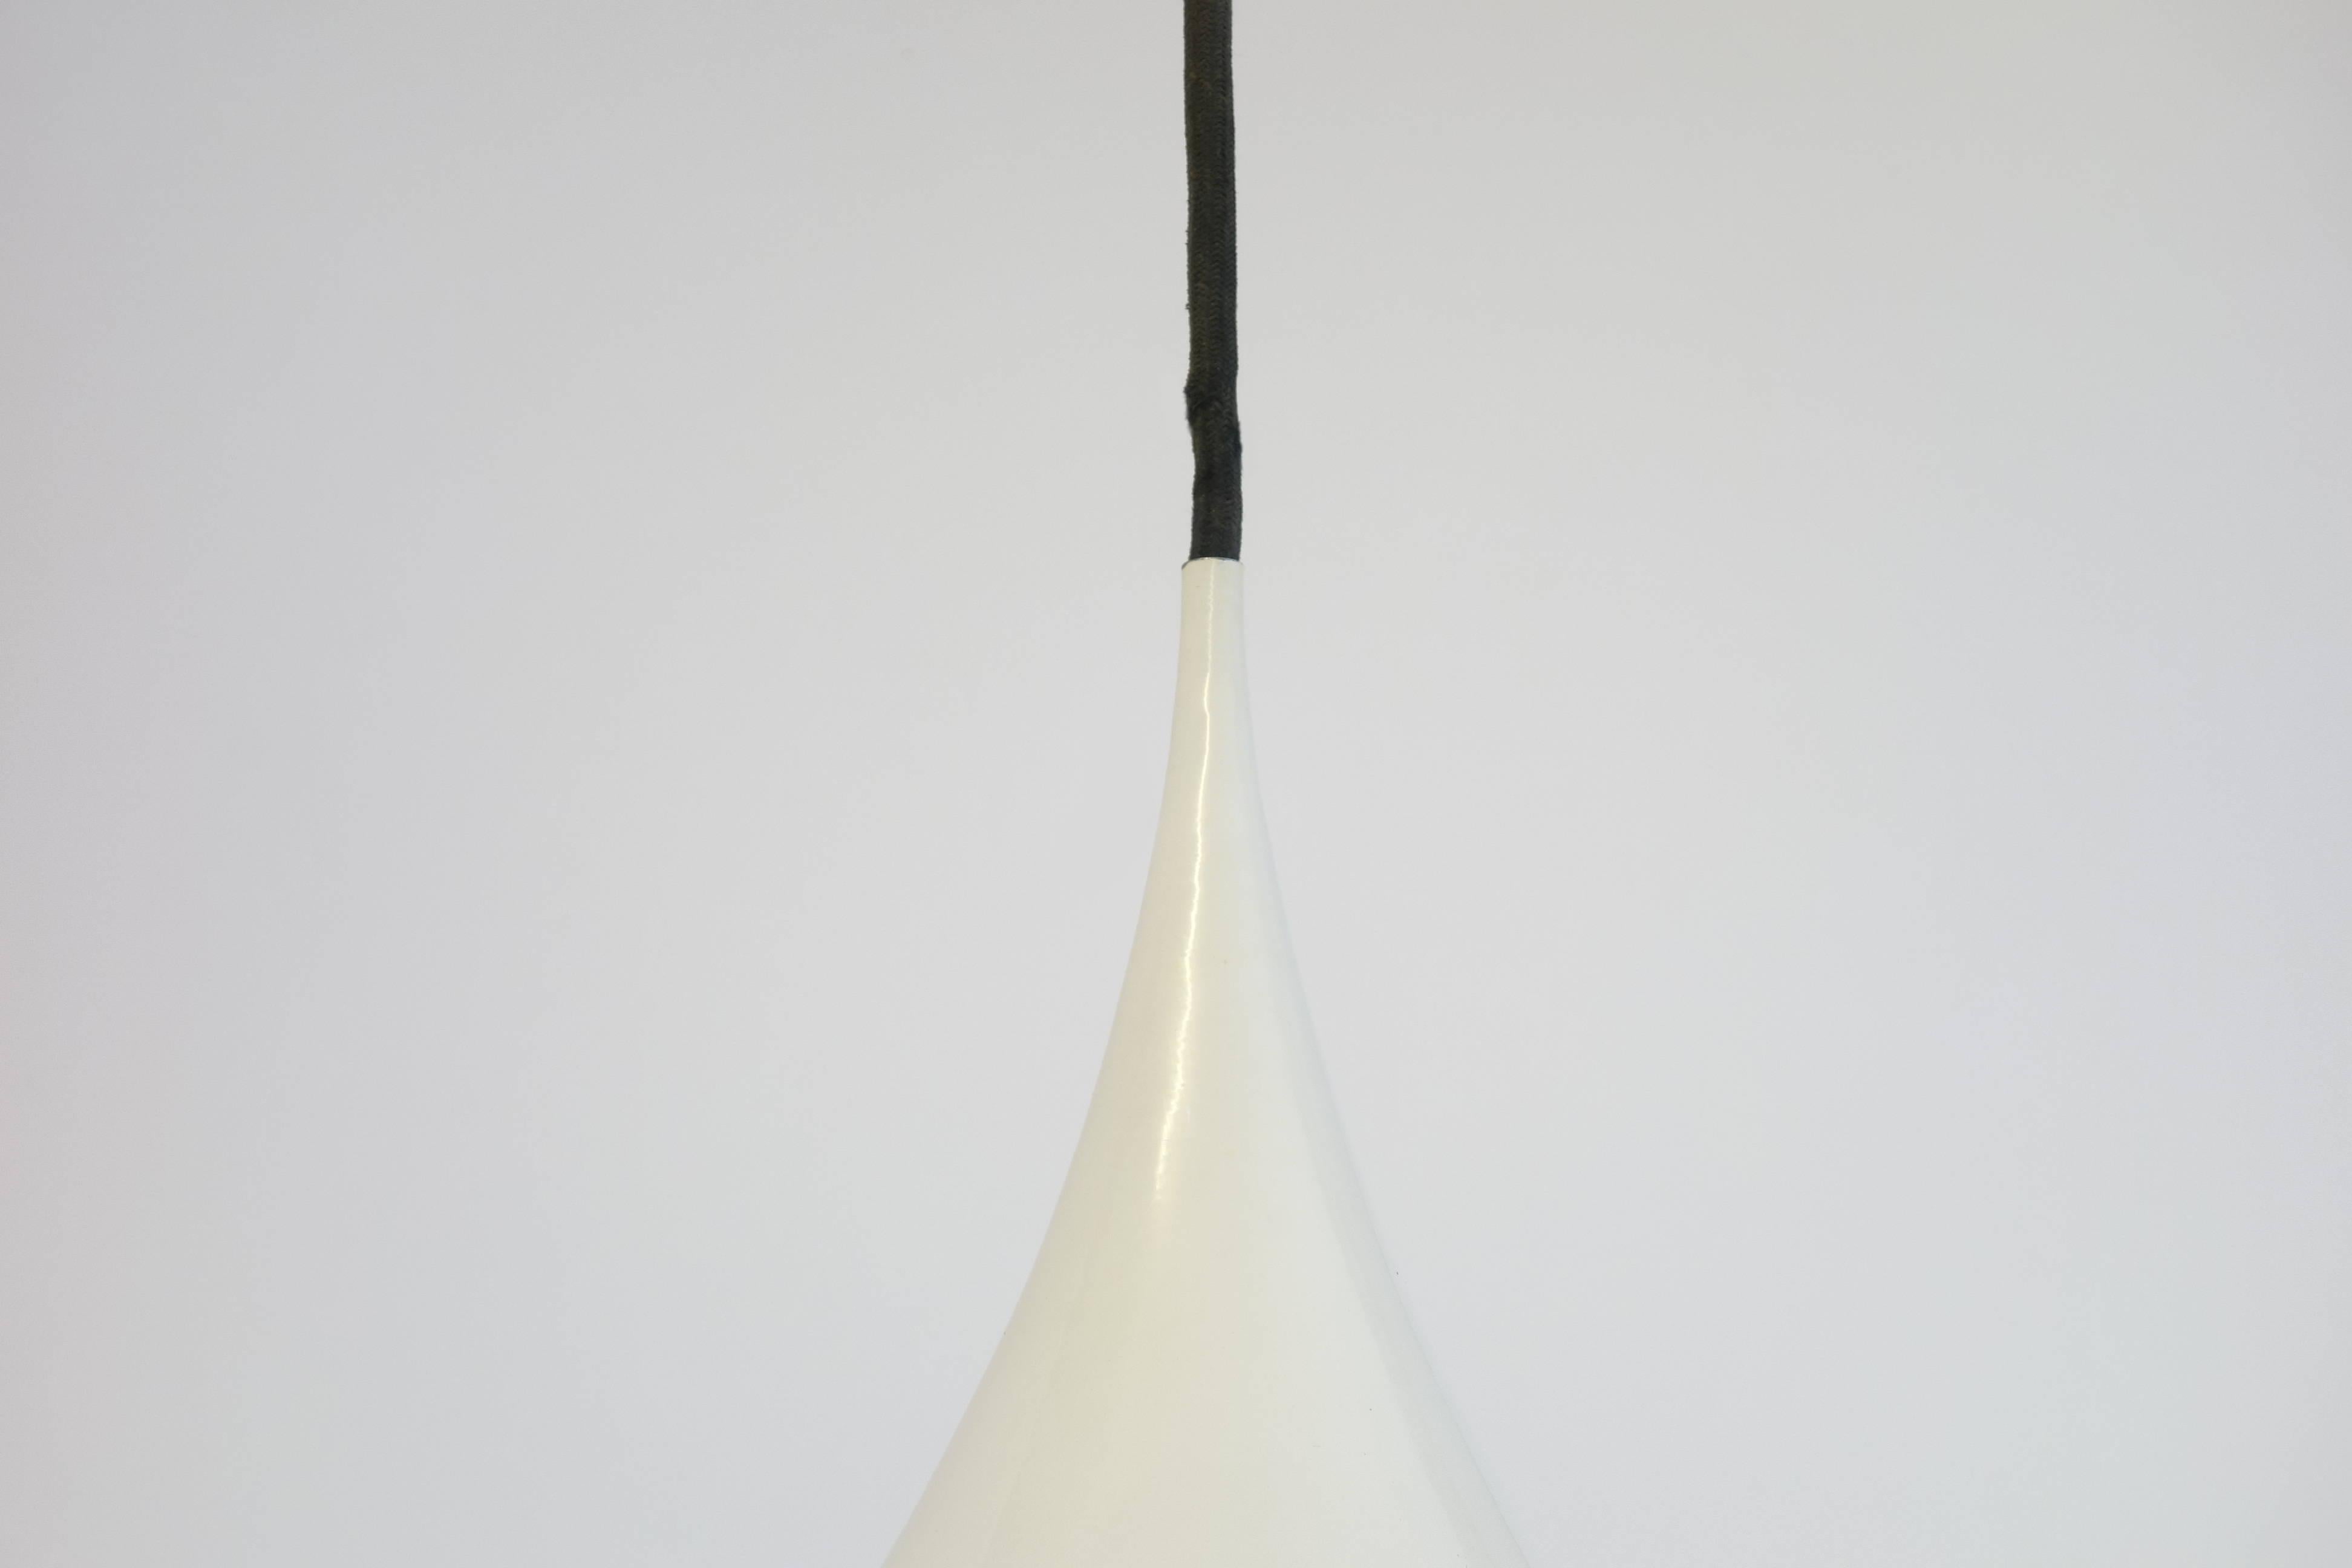 Lacquered Large “Semi Pendant” Chandelier by Fog & Morup, Denmark 1967 Midcentury Style For Sale